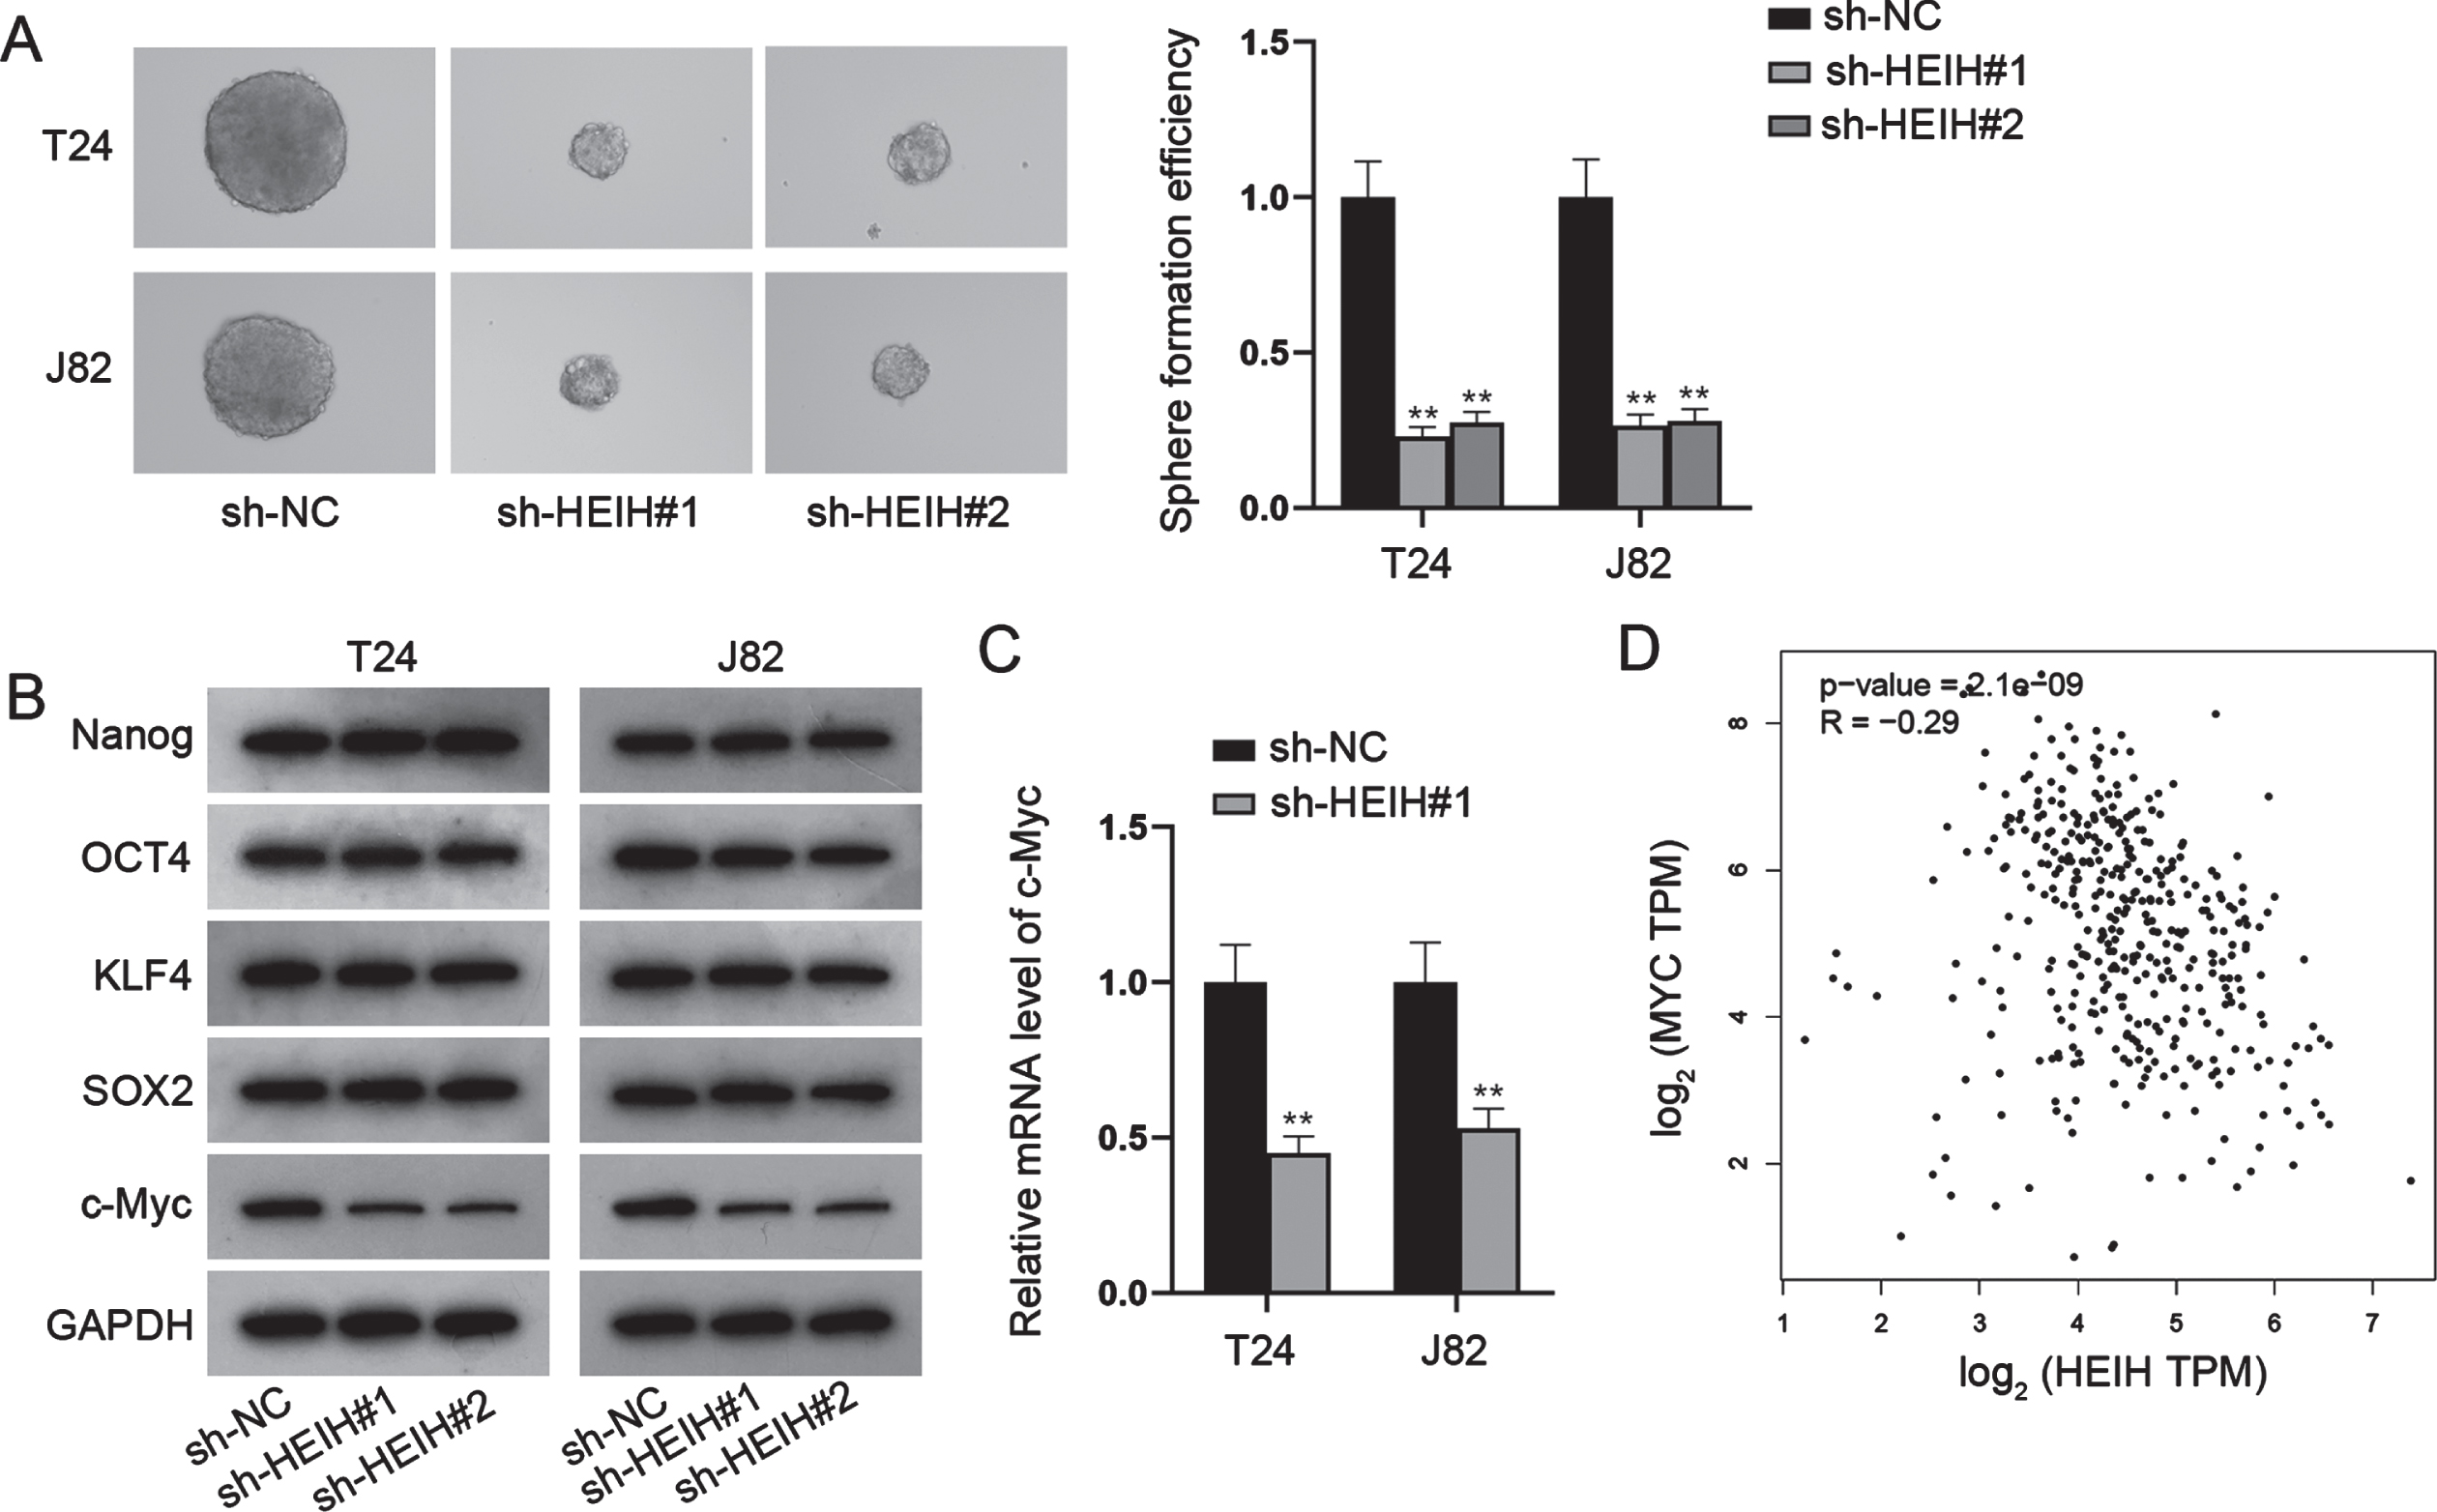 HEIH contributes to BCa cell stemness via up-regulating c-Myc. (A) Sphere formation assay was performed to evaluate cell stemness in HEIH-silenced BCa cells. (B) Western blot was used to analyze the protein levels of Nanog, OCT4, KLF4, SOX2 and c-Myc in HEIH-inhibited BCa cells. (C) RT-qPCR was used to measure c-Myc mRNA level in HEIH-silenced BCa cells. (D) The correlation of HEIH and MYC expression in BLCA based on GEPIA analysis. **P < 0.01.